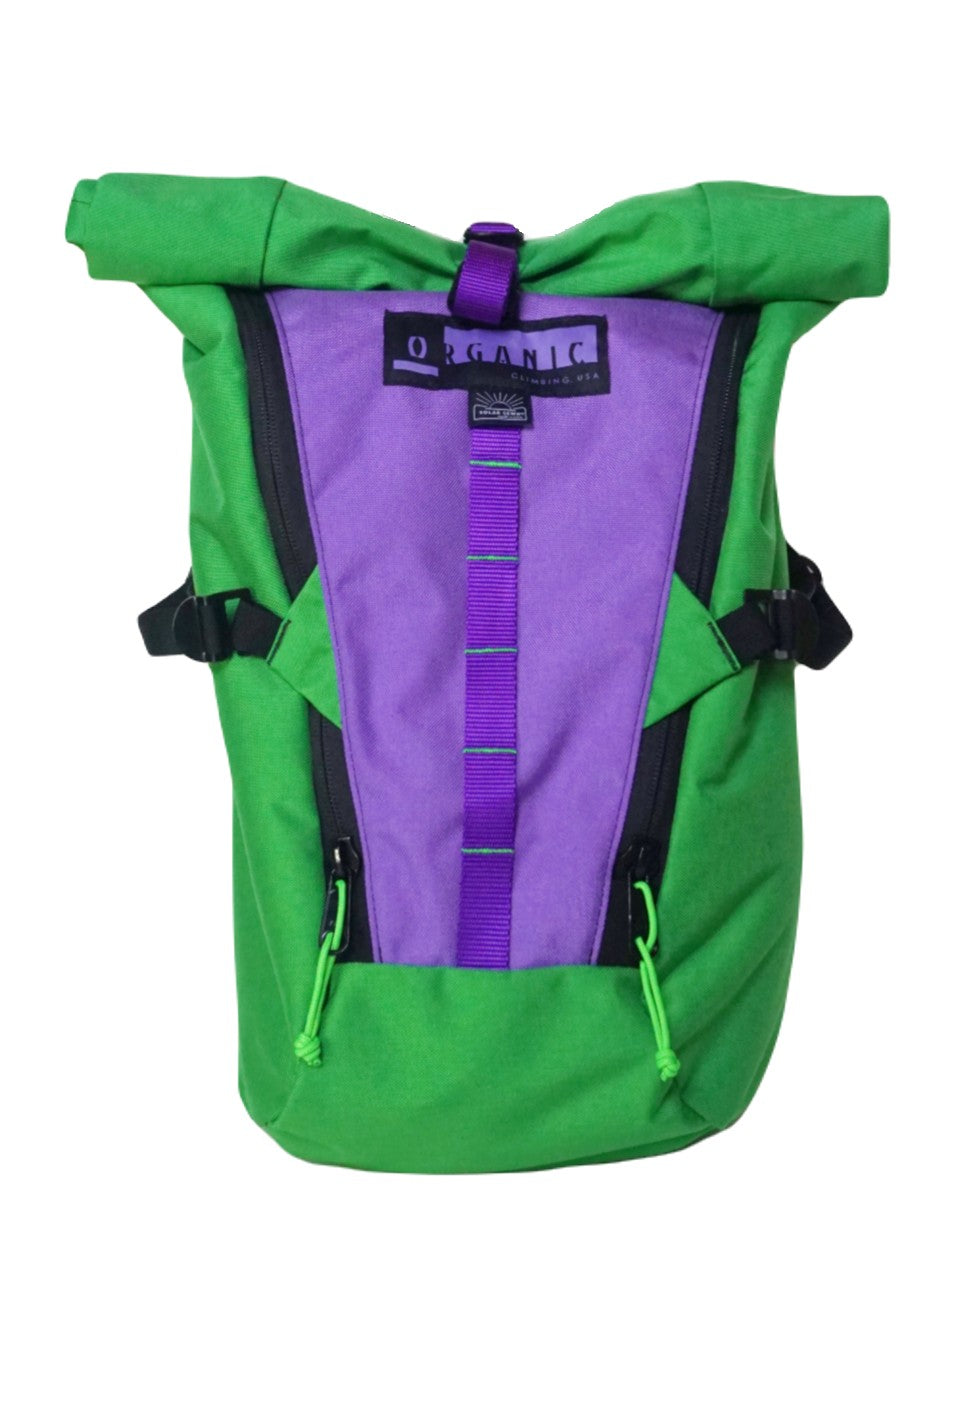 Dual Zip Roll Down Back Pack- Customizable Colors